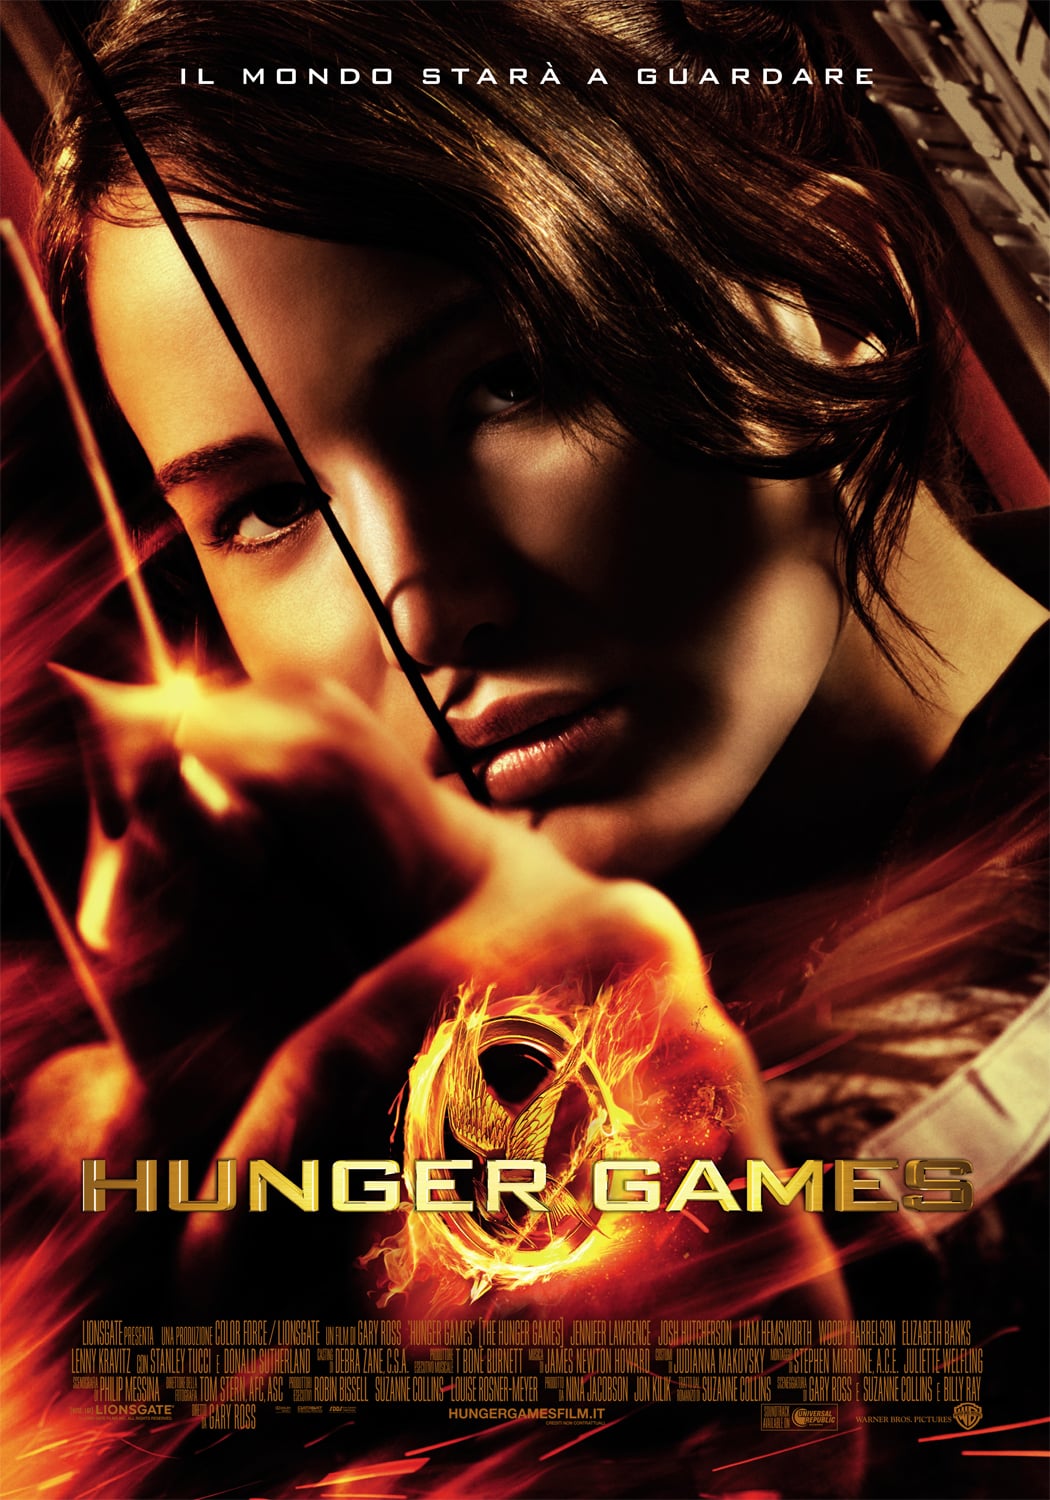 [RECENSIONE] Hunger Games (Gary Ross)